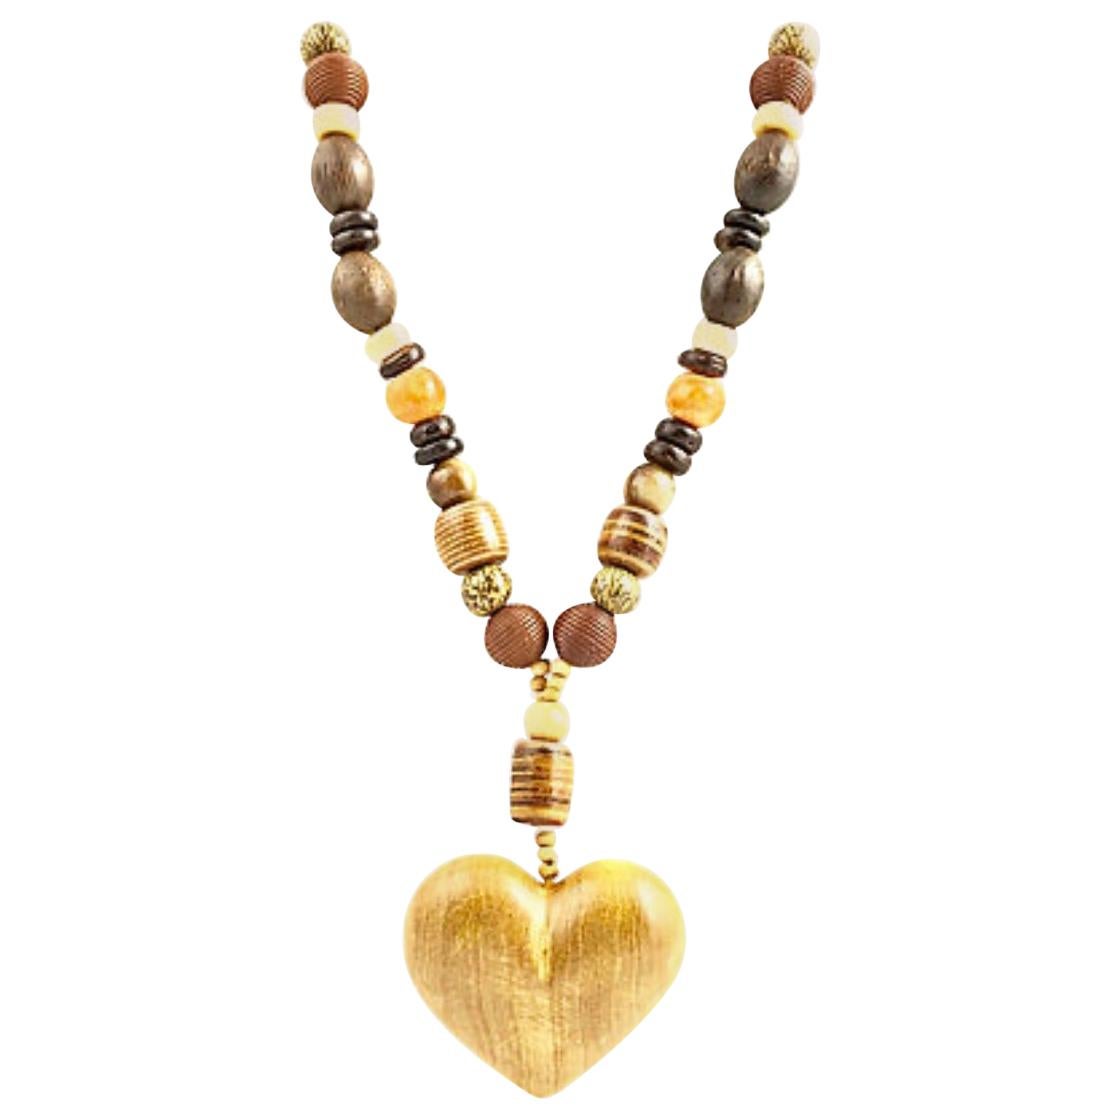 Stone and Wood Heart Bead Necklace by Fabrice Paris For Sale